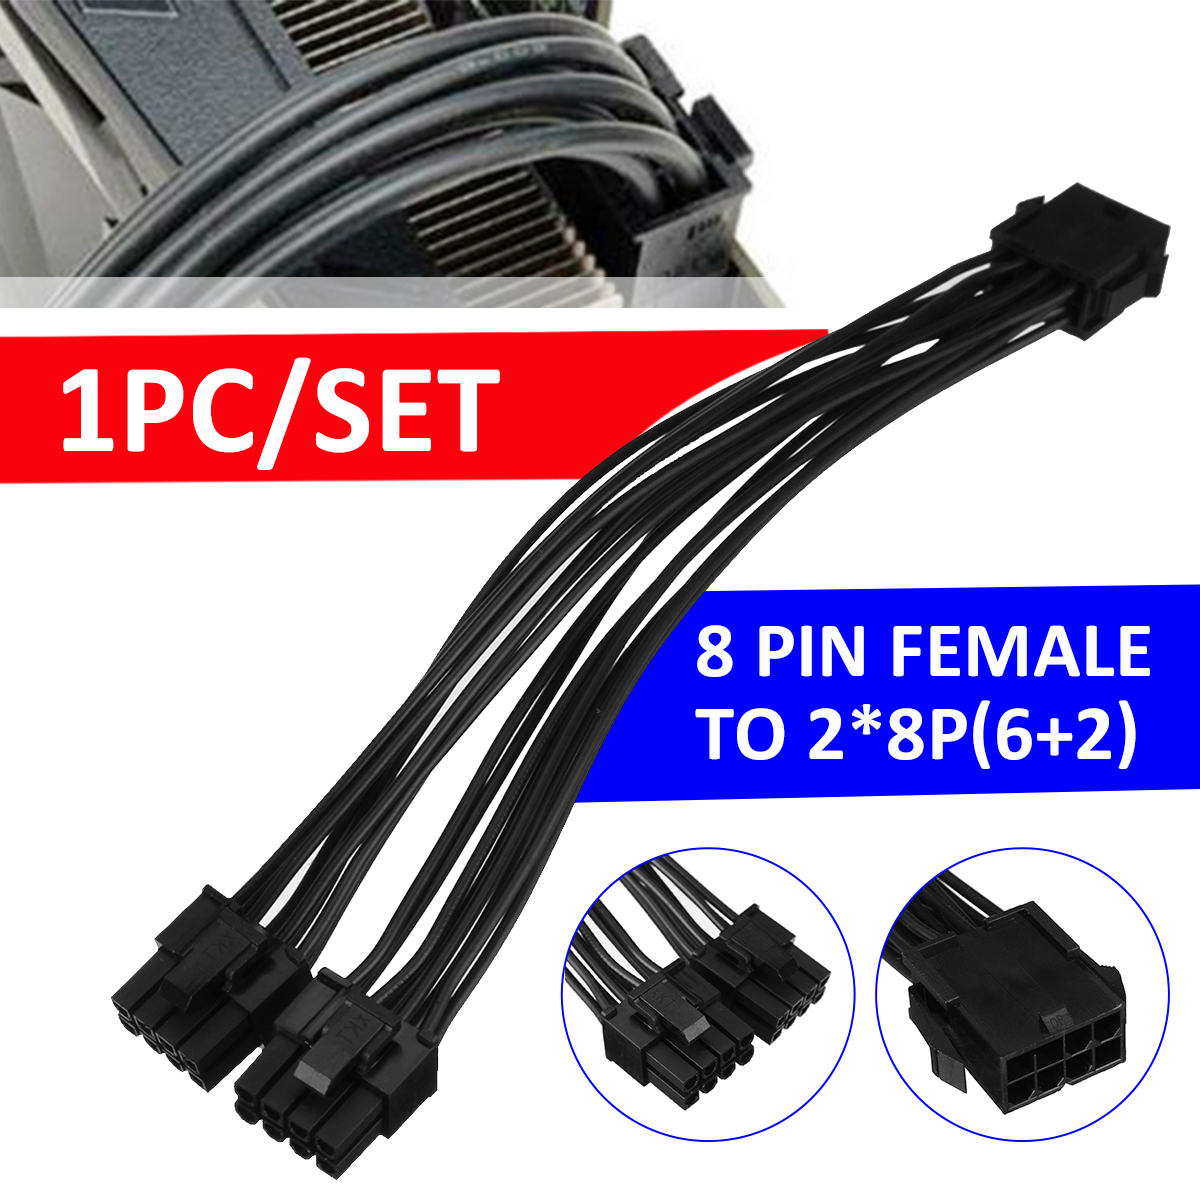 20cm-Graphics-Card-8-Pin-Female-to-28P62pin-Extention-Power-Cable-Male-1931117-2